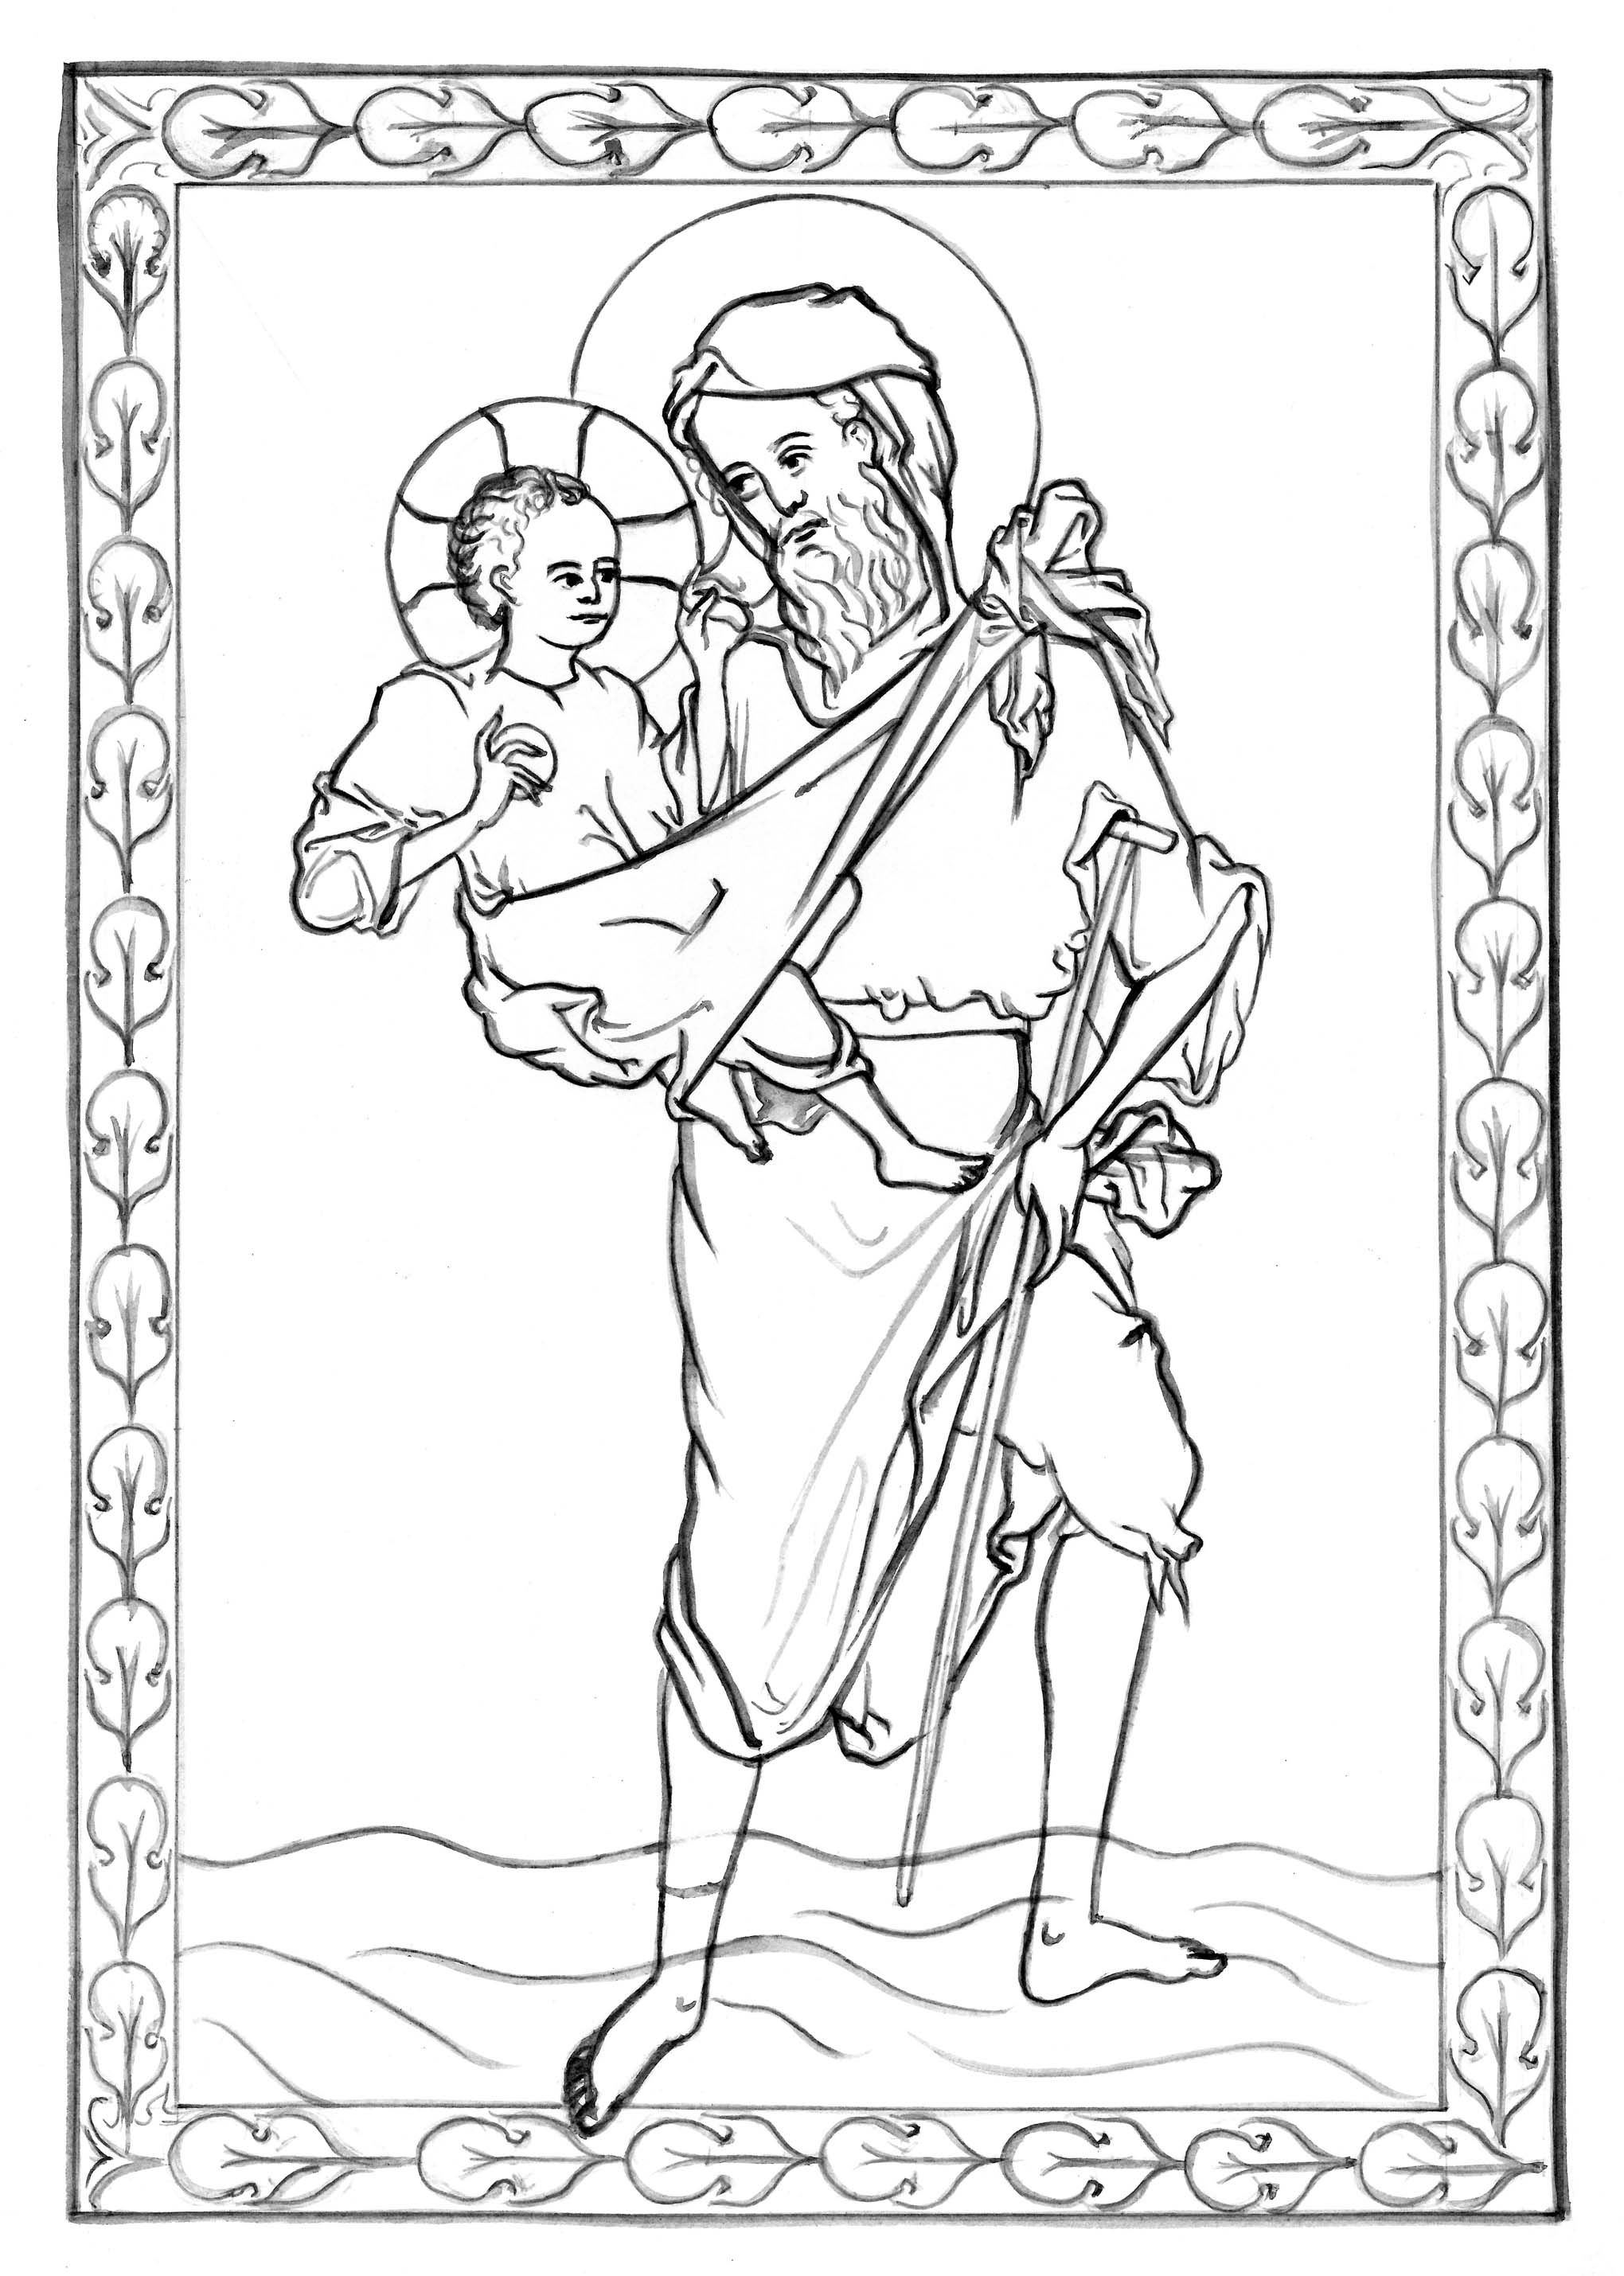 Coloring pages st catherine of siena coloring books